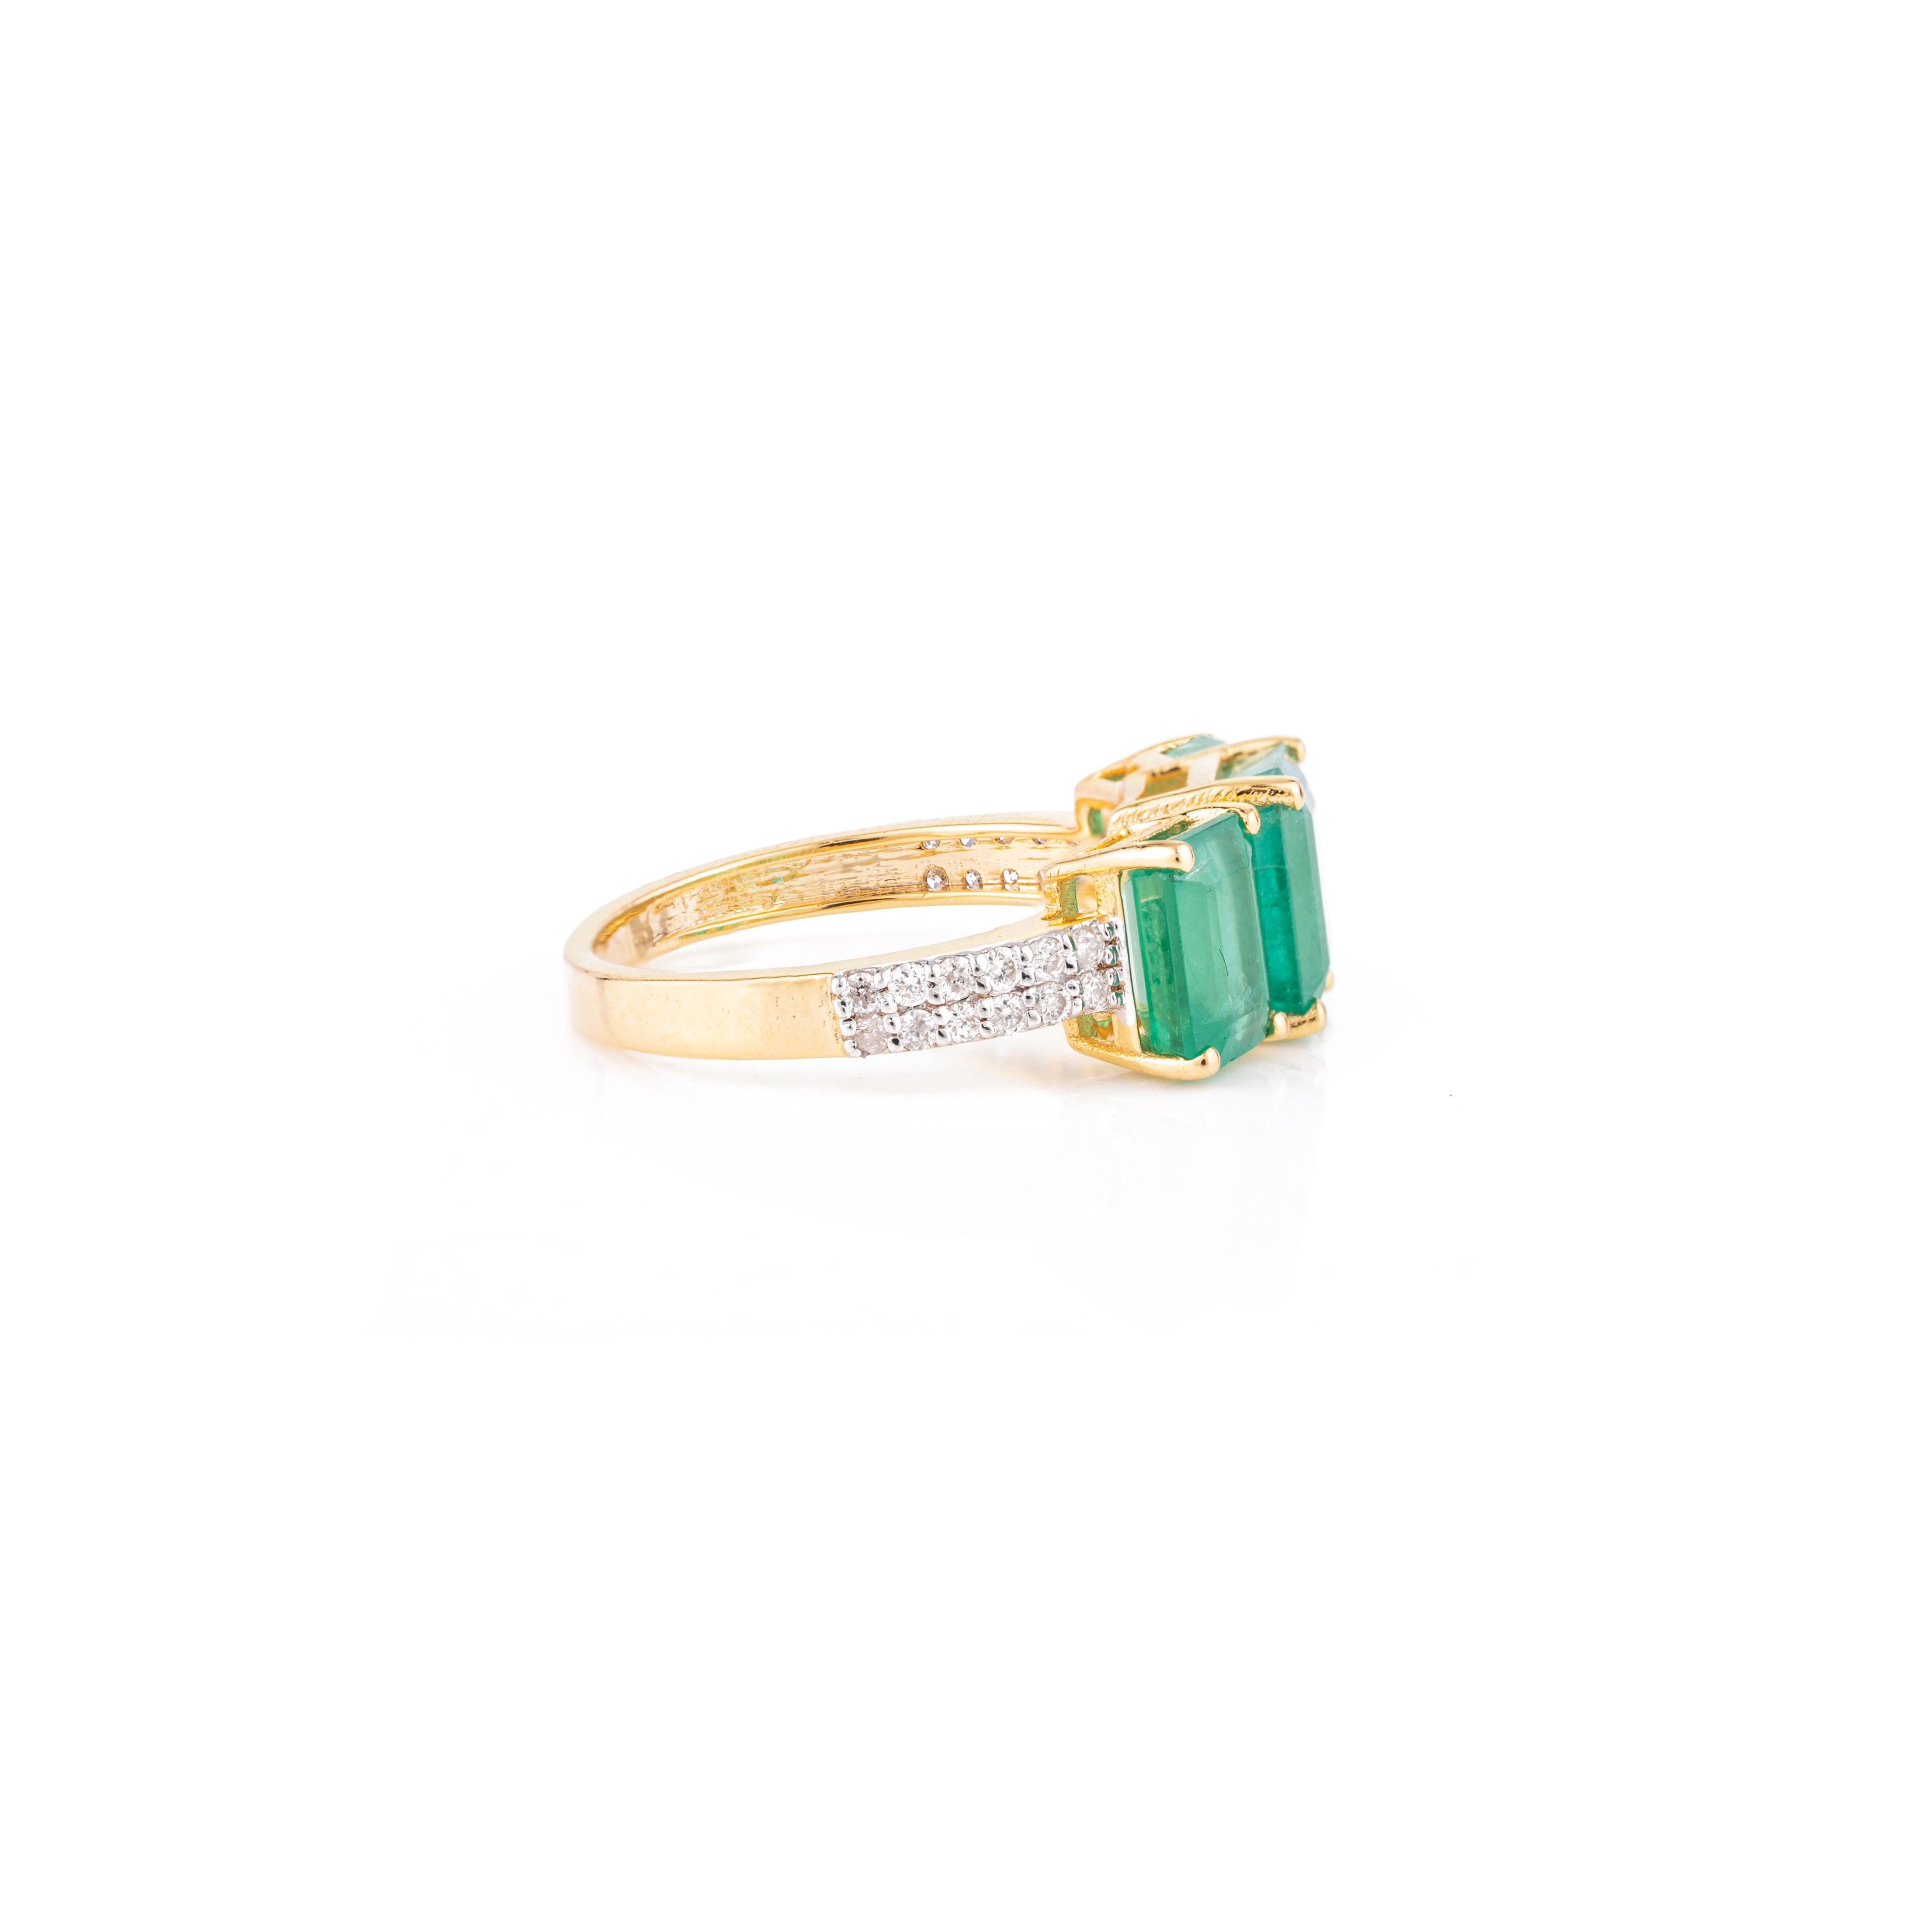 For Sale:  4.14 CTW Three Stone Genuine Emerald Ring with Diamonds in 18k Yellow Gold  4